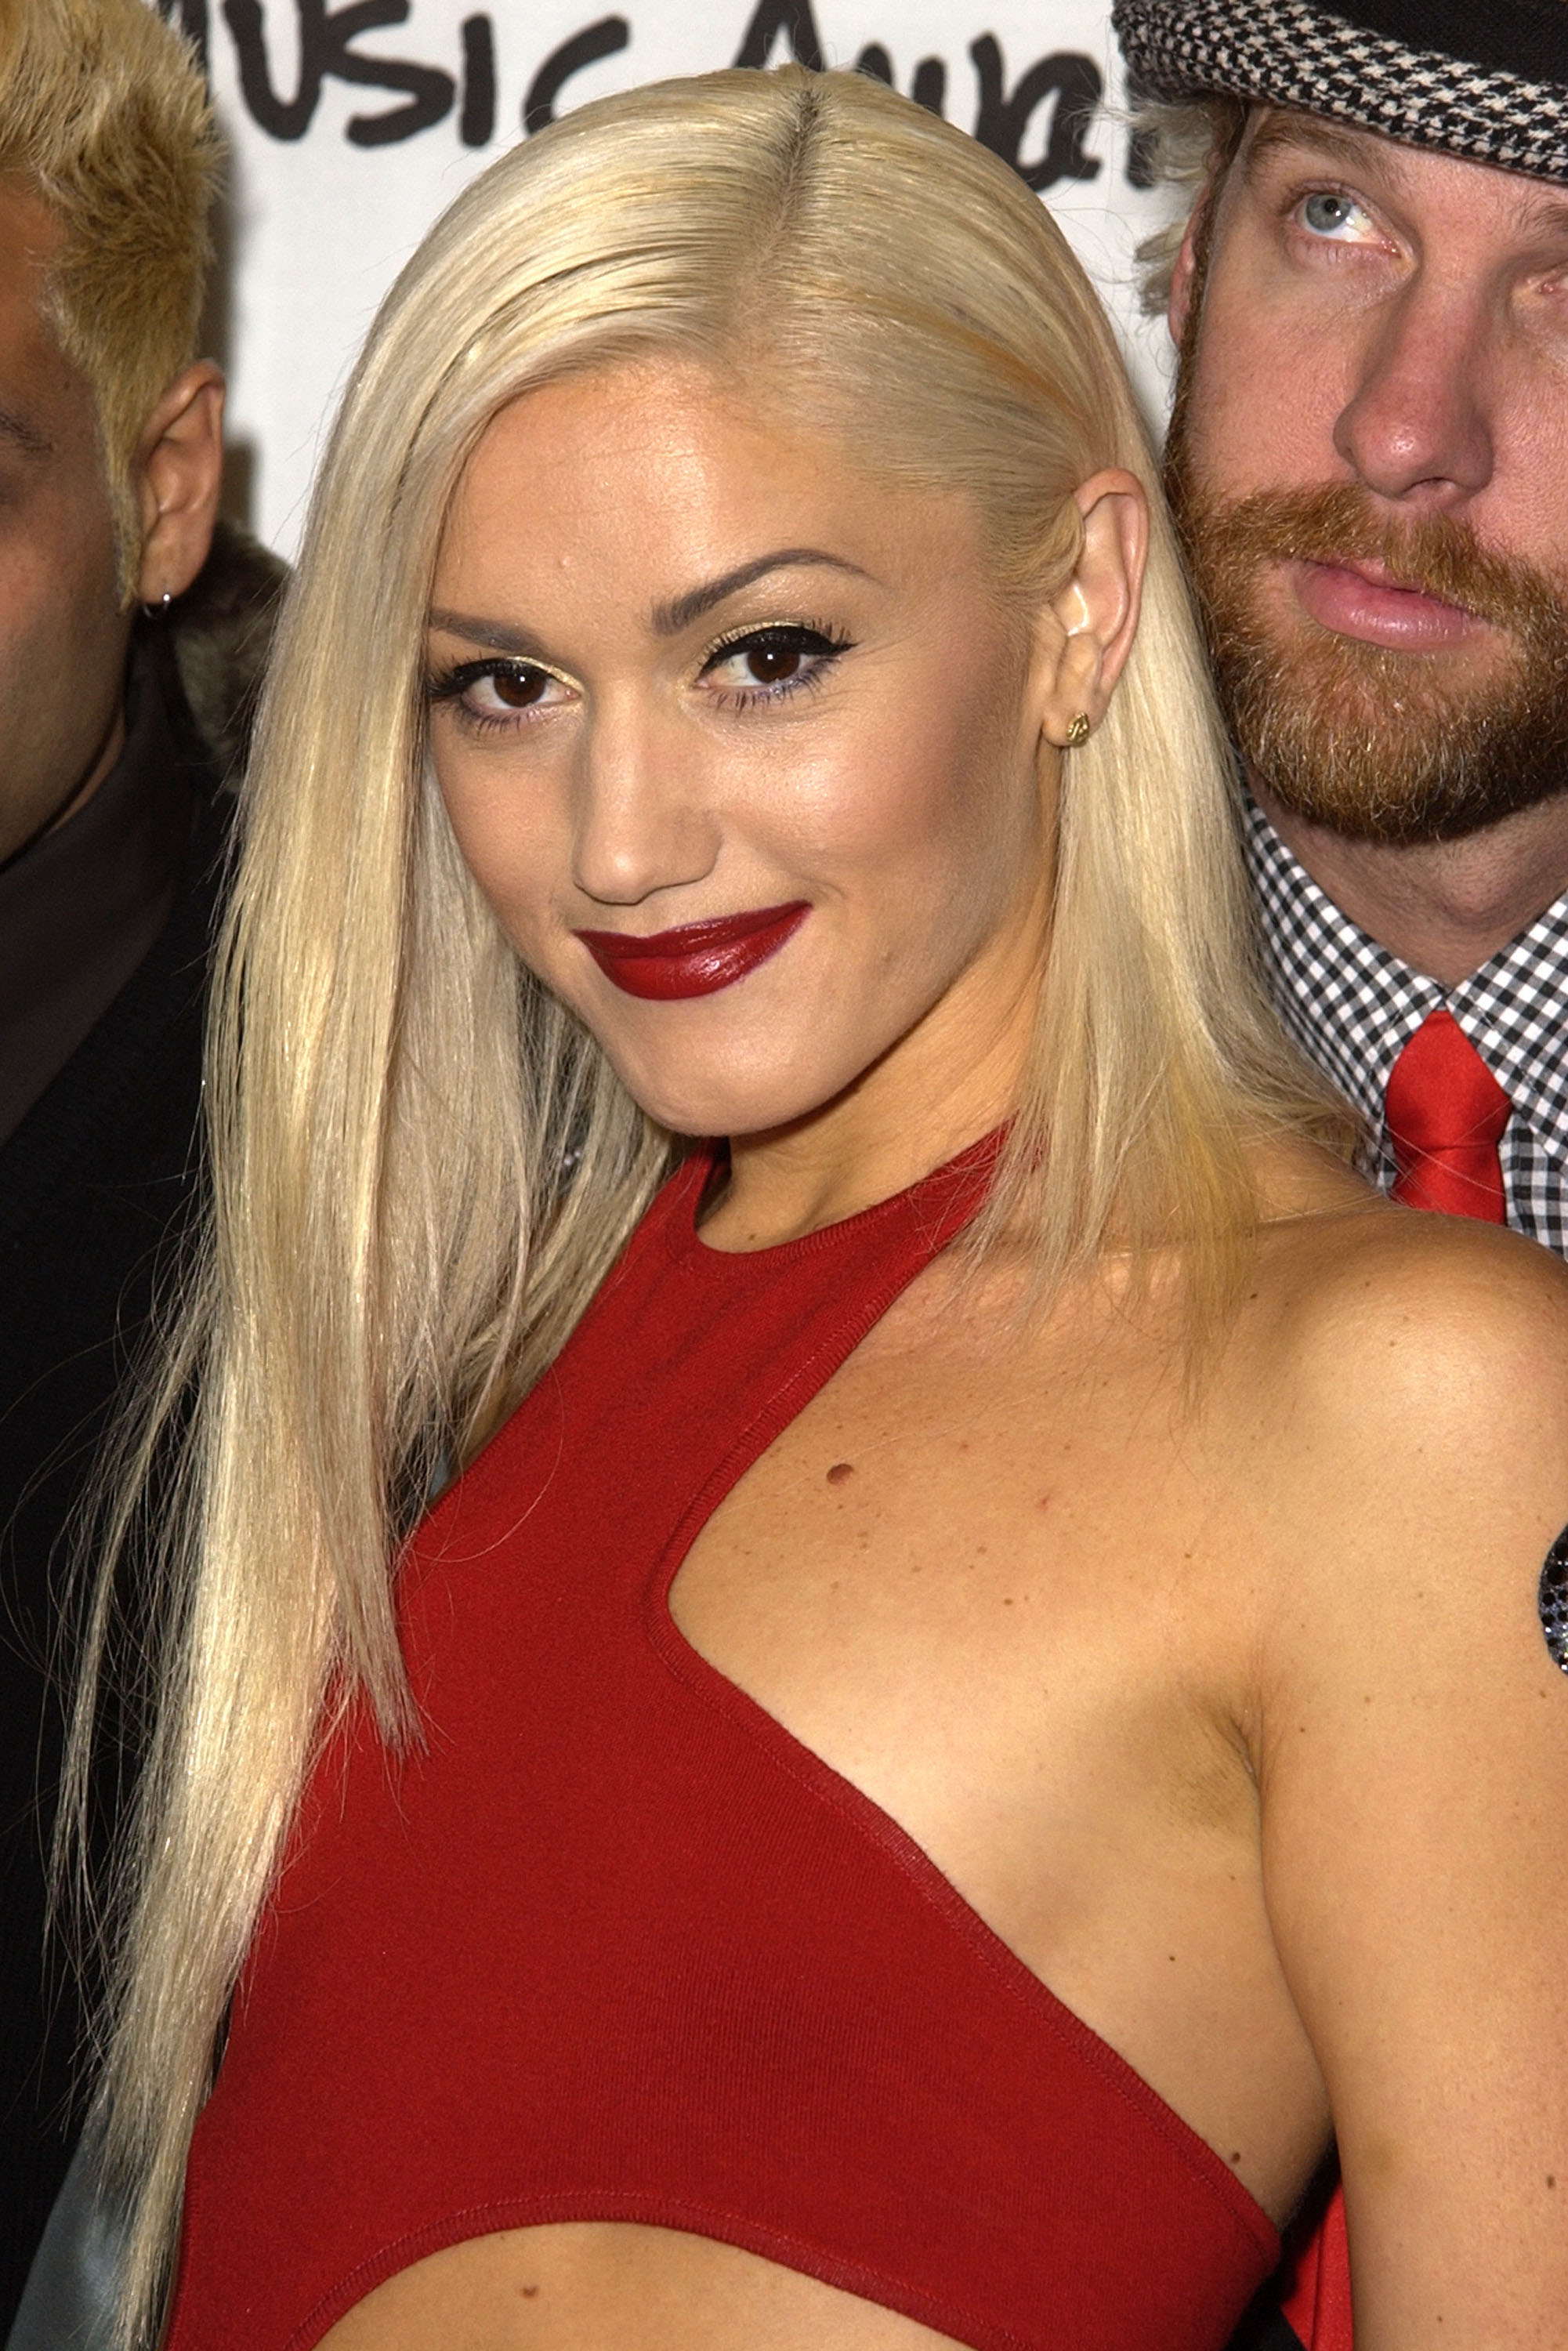 Gwen Stefani at VH-1 Music Awards  in 2001 | Source: Getty Images